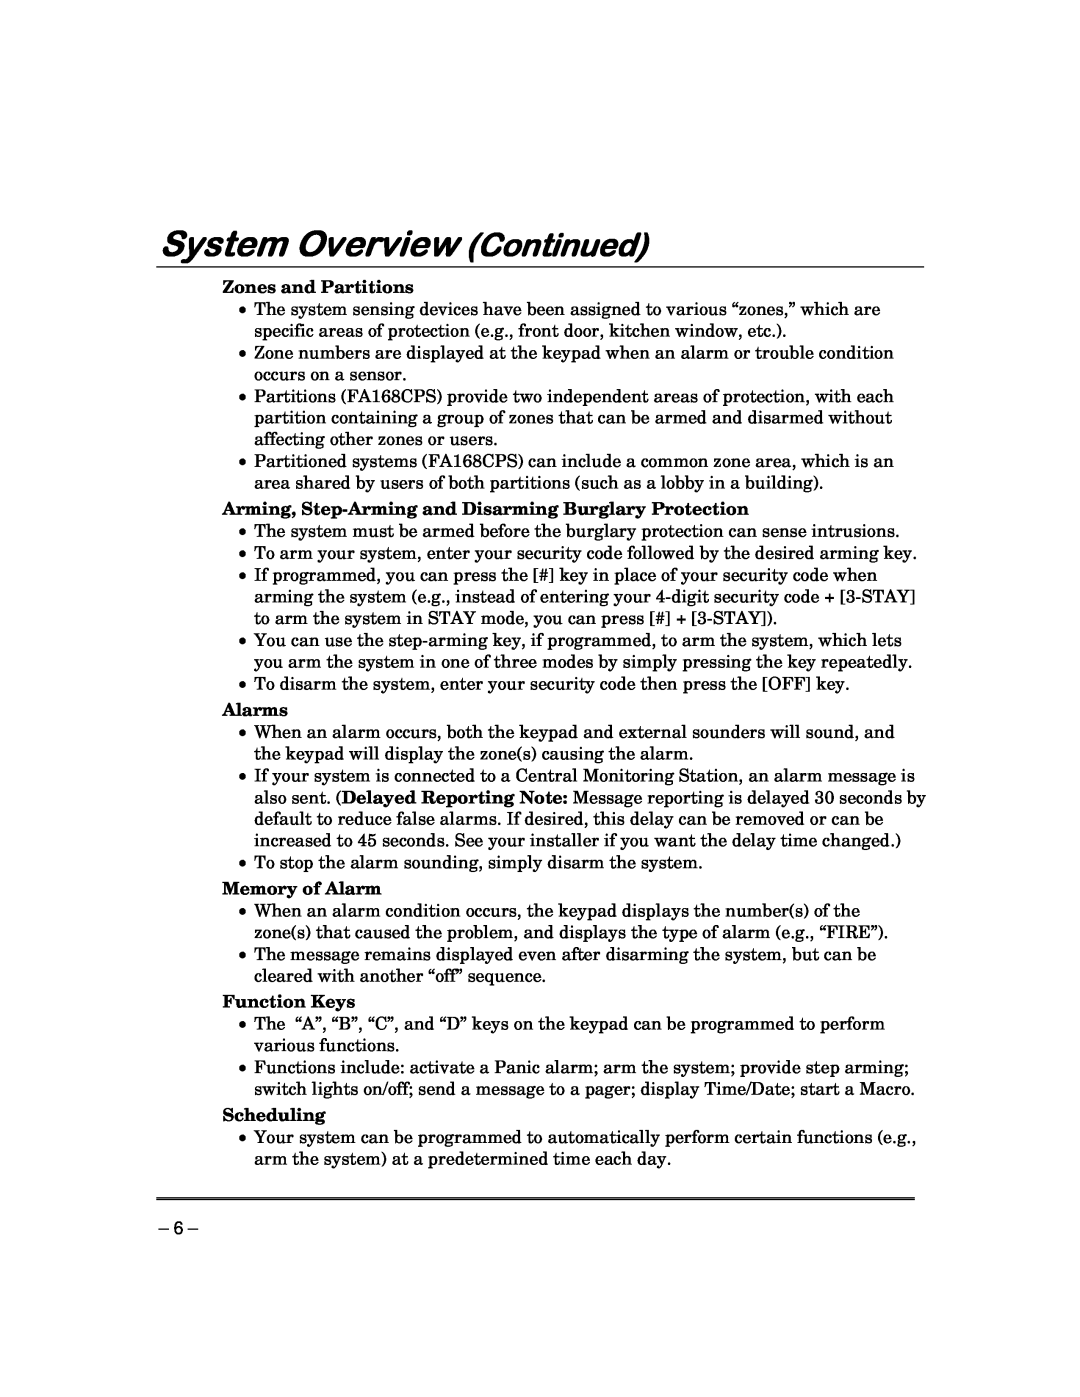 Garmin FA168CPS manual System Overview Continued 